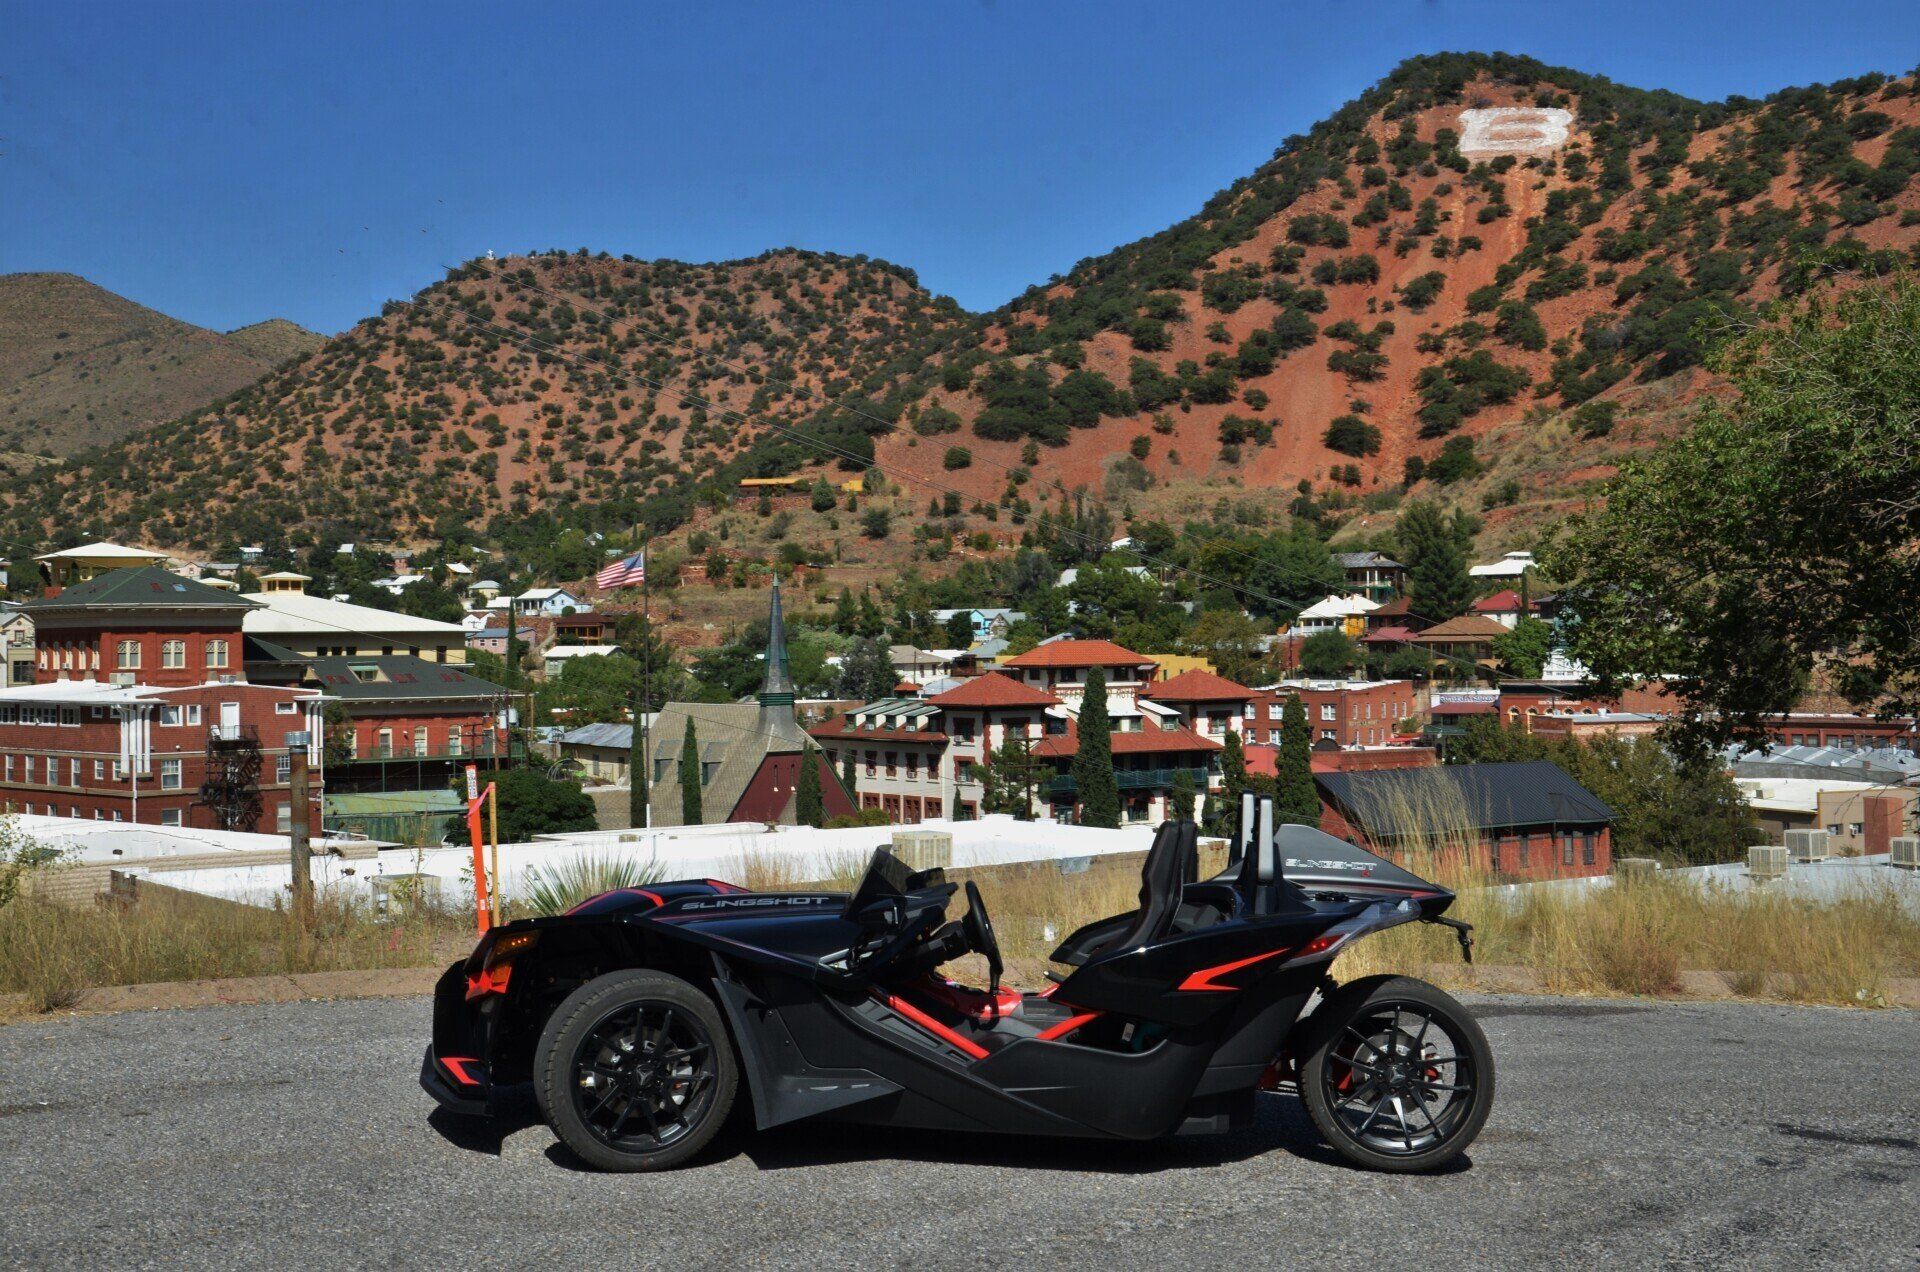 Polaris Slingshot parked at scenic view point in Tucson AZ